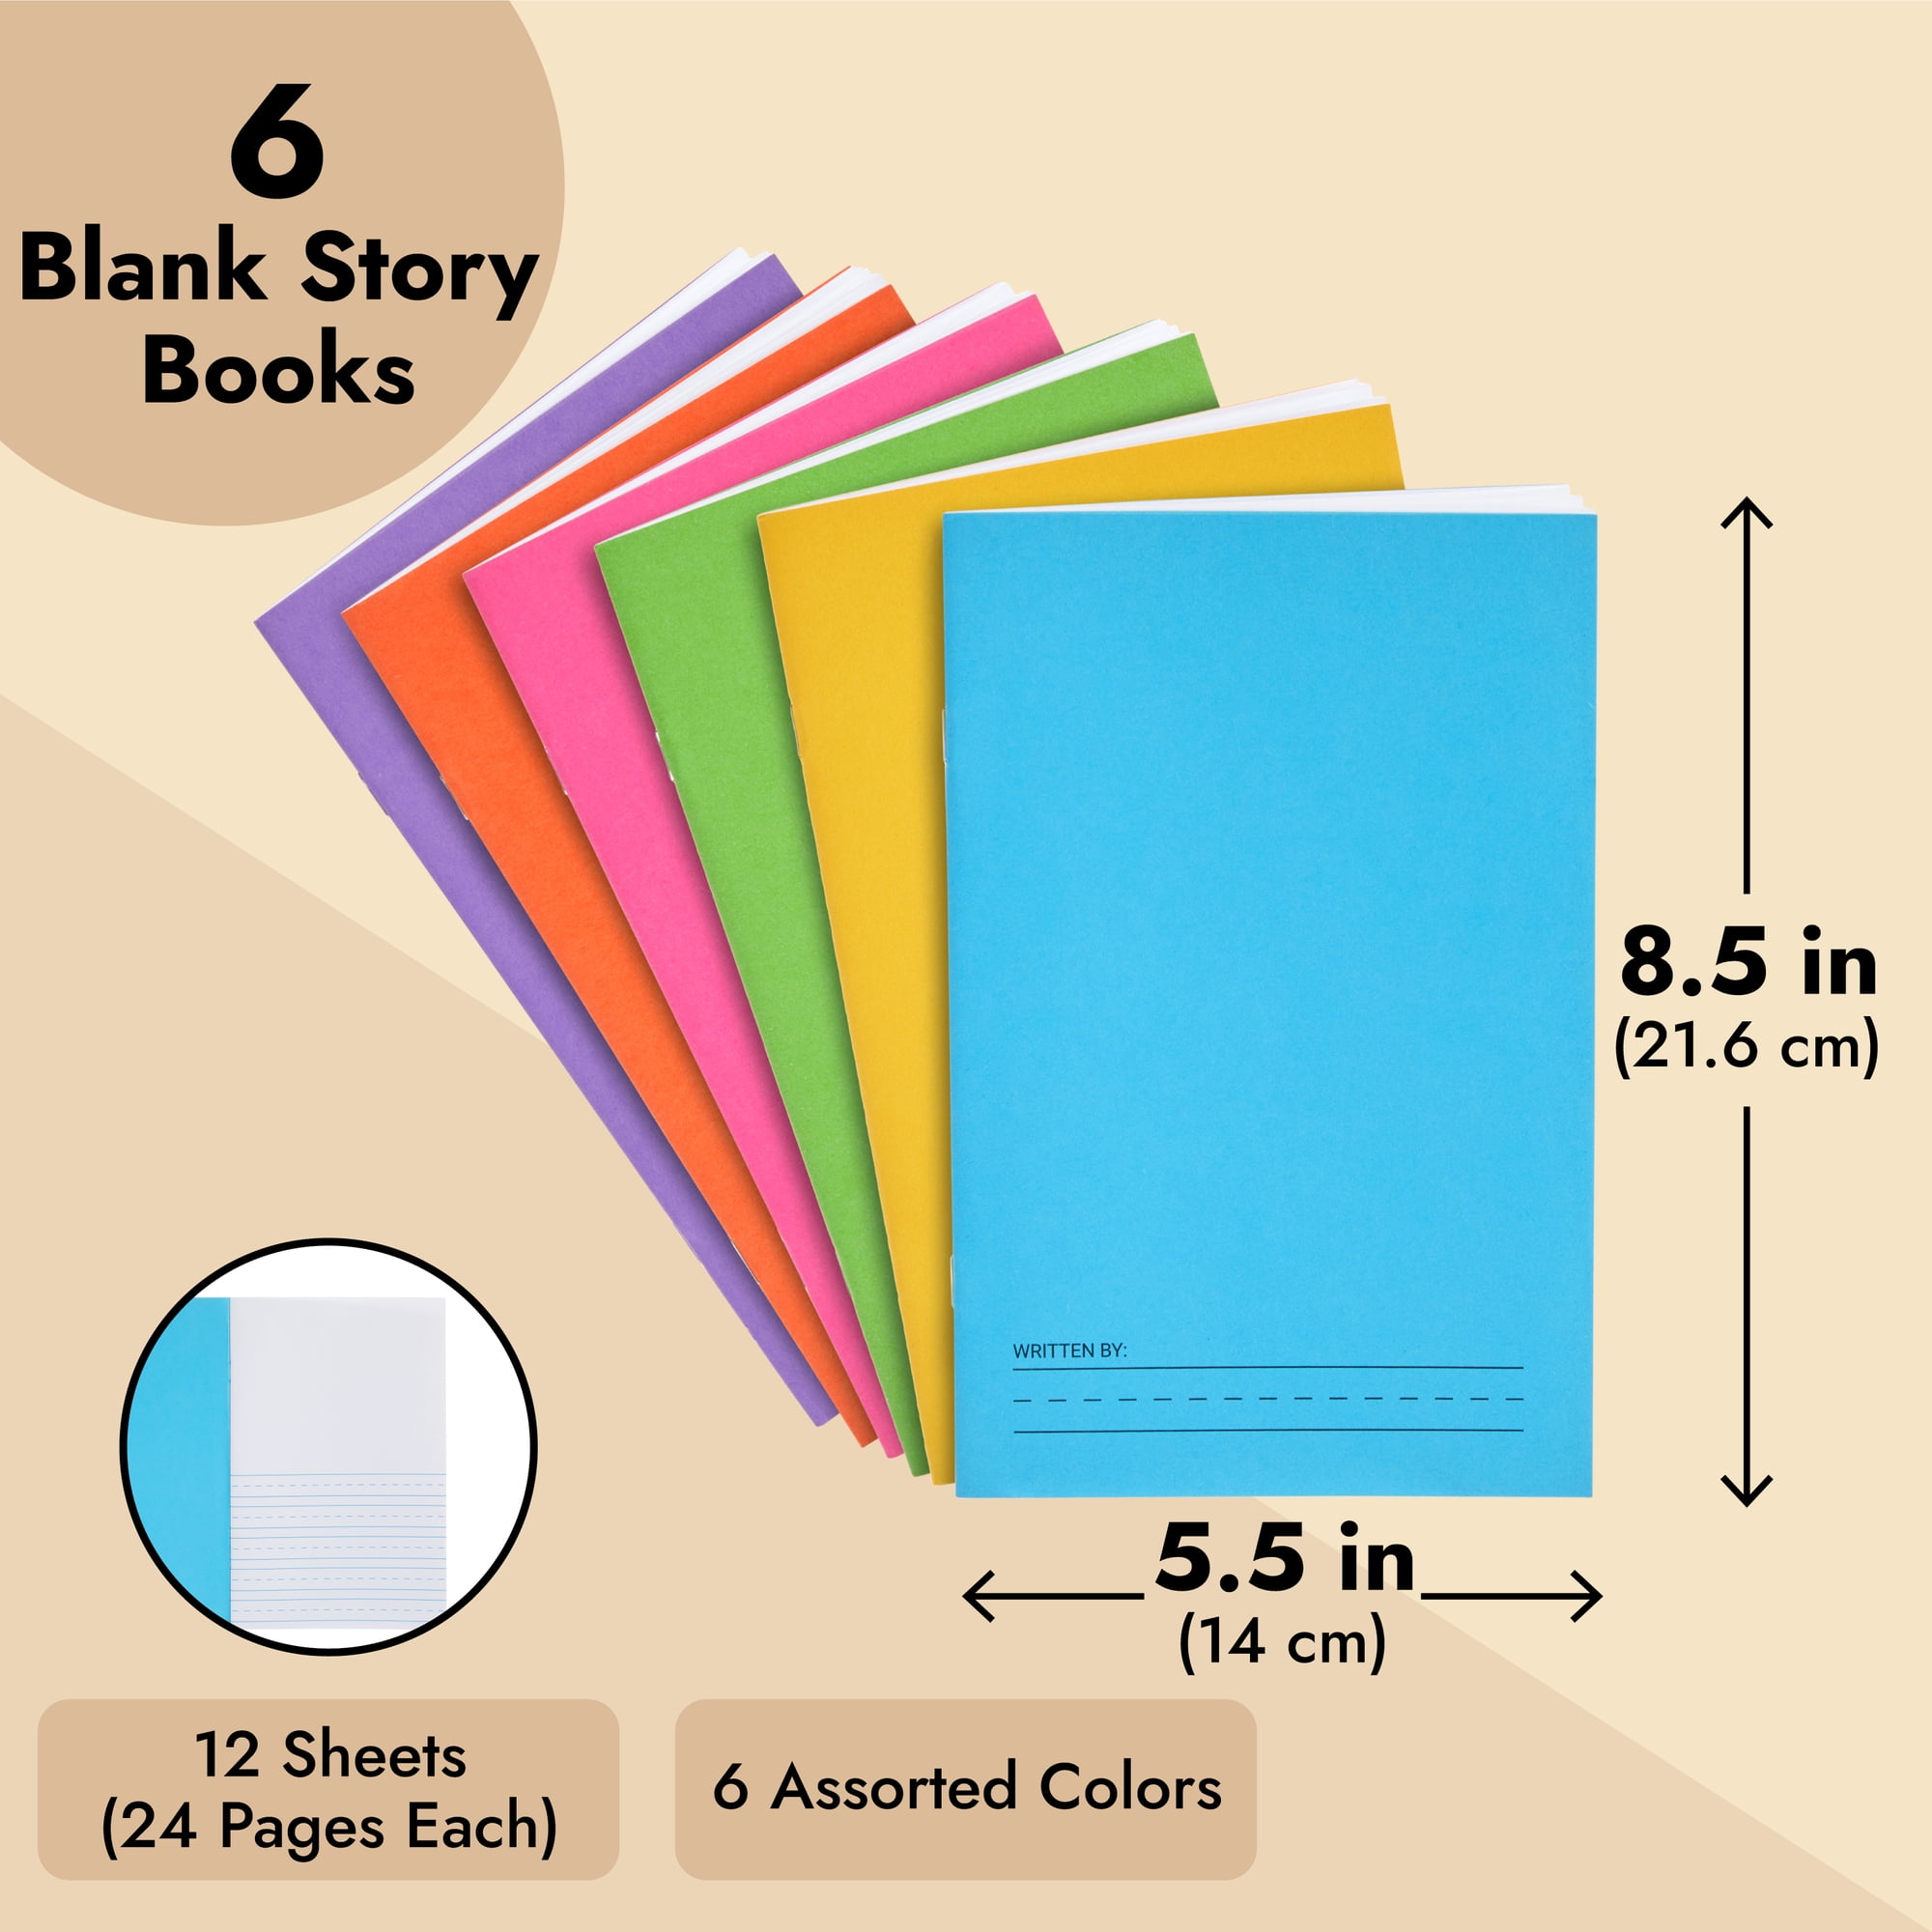 Bright Creations 6 Pack of Blank Books for Kids to Write Stories, Make Your Own Comic, Journal, or Book, Paperback (6 Colors, 12 Sheets/24 Pages